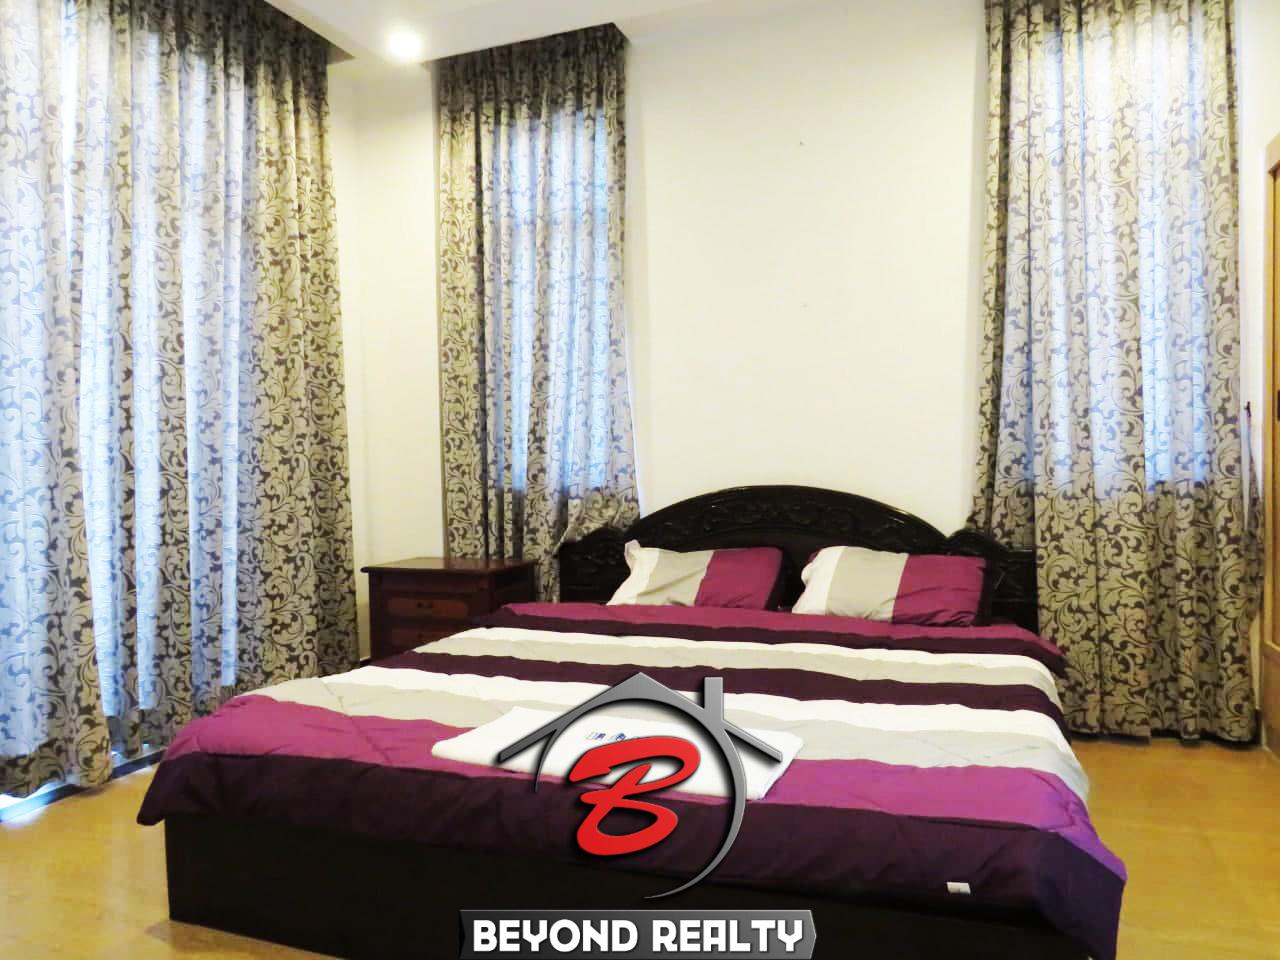 the bedroom of the 1-bedroom condo for sale in Russian Market Toul Tom Poung Phnom Penh Cambodia